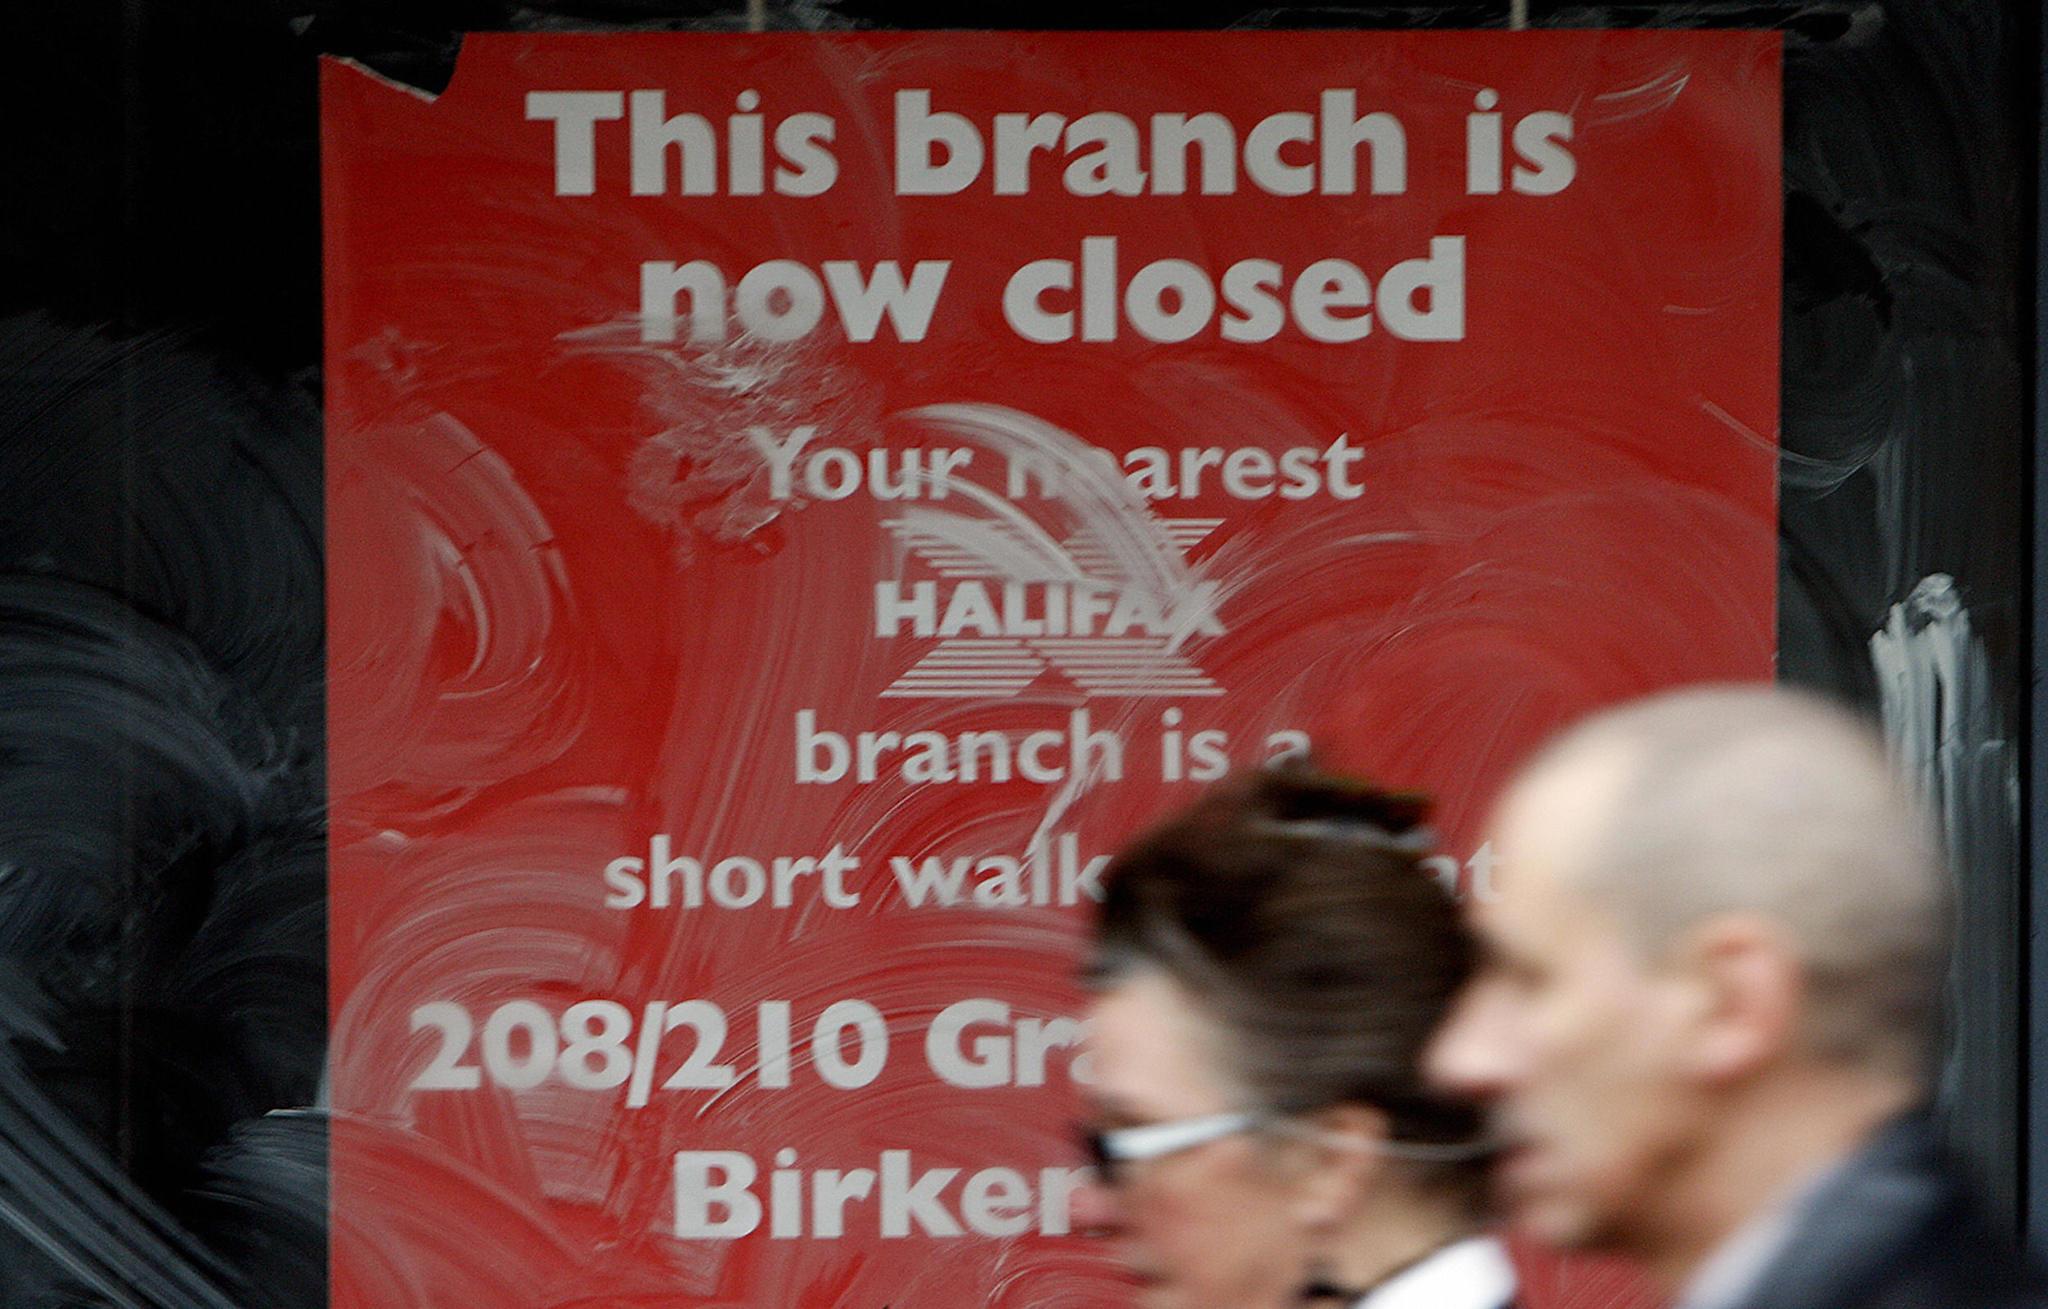 A closed branch of Halifax Bank of Scotland (HBOS) is pictured in Birkenhead in north-west England, on October 15, 2008